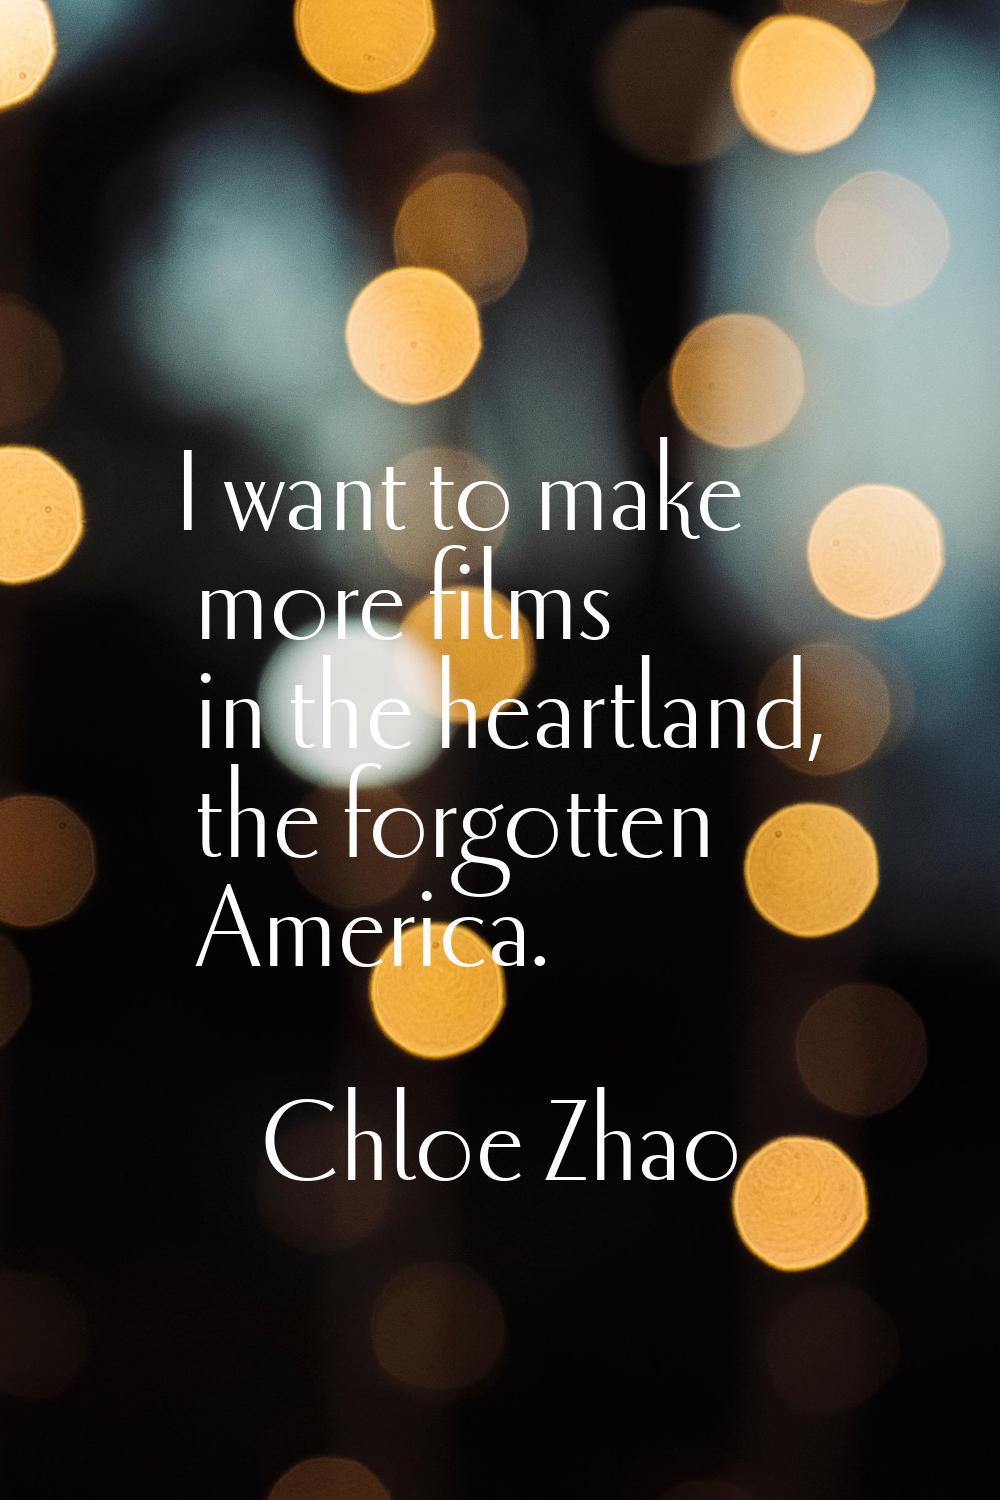 I want to make more films in the heartland, the forgotten America.